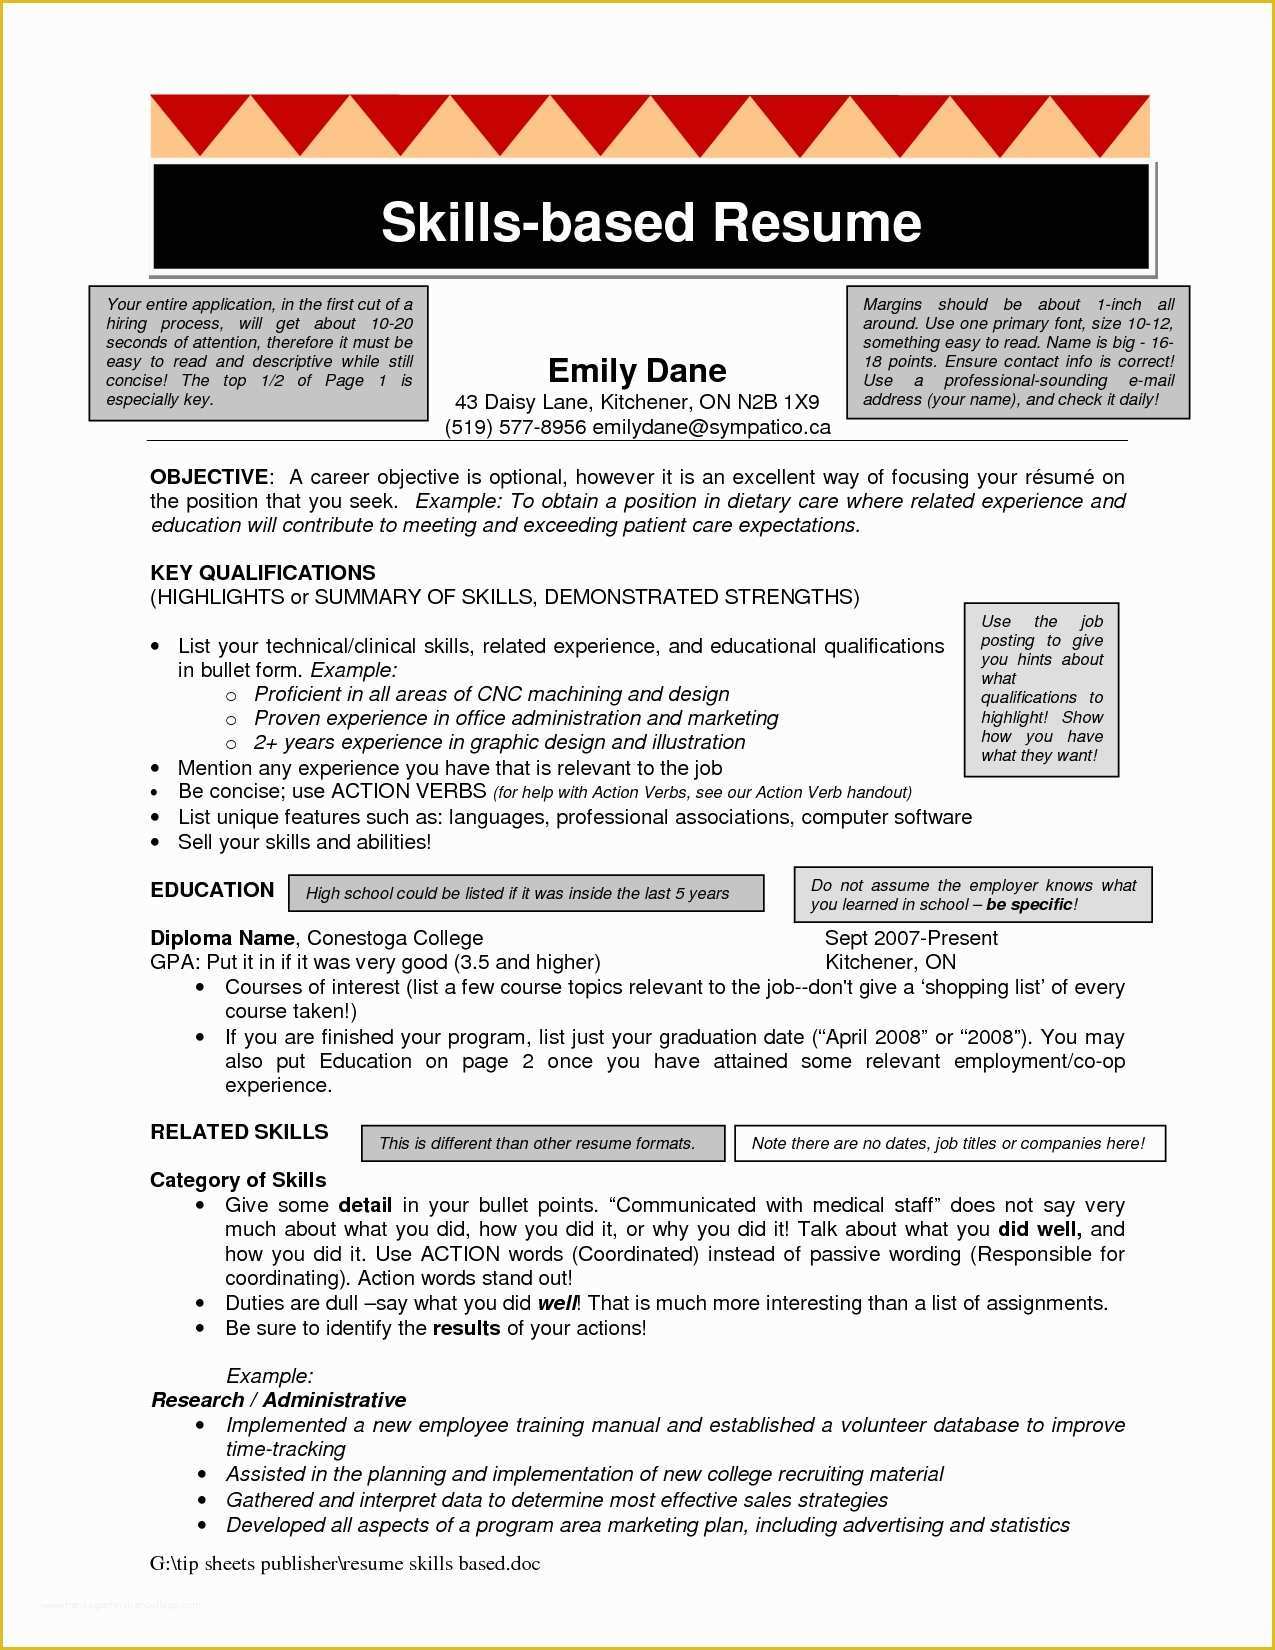 Skill Based Resume Template Free Download Of Skills Based Resume Template